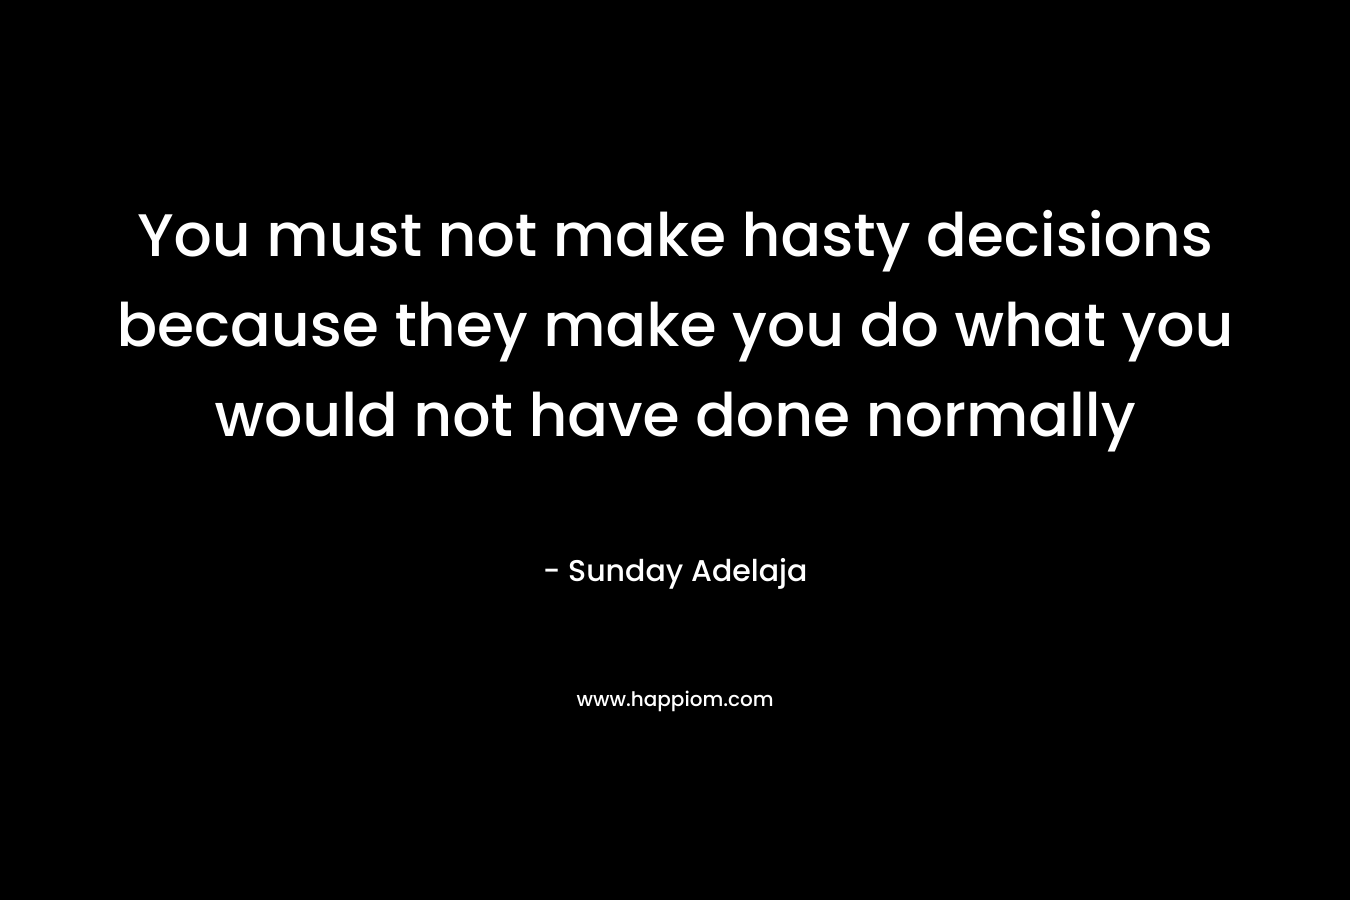 You must not make hasty decisions because they make you do what you would not have done normally – Sunday Adelaja